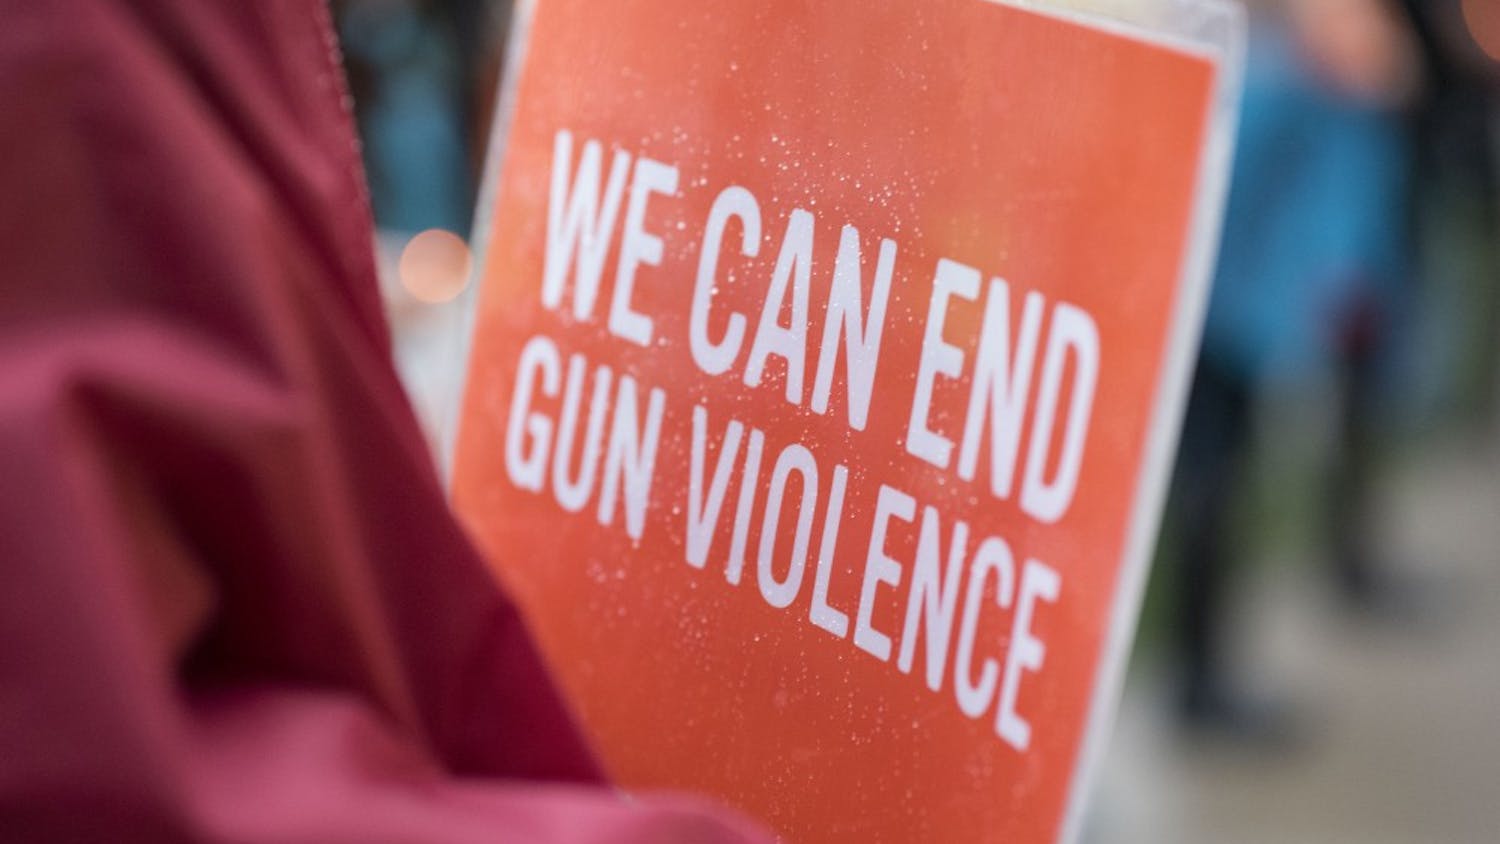 Ann Edmonds holds a sign at the Sunday vigil honoring victims of the Las Vegas shooting. The signs were distributed by Moms Demand Action, a group advocating stricter gun laws.